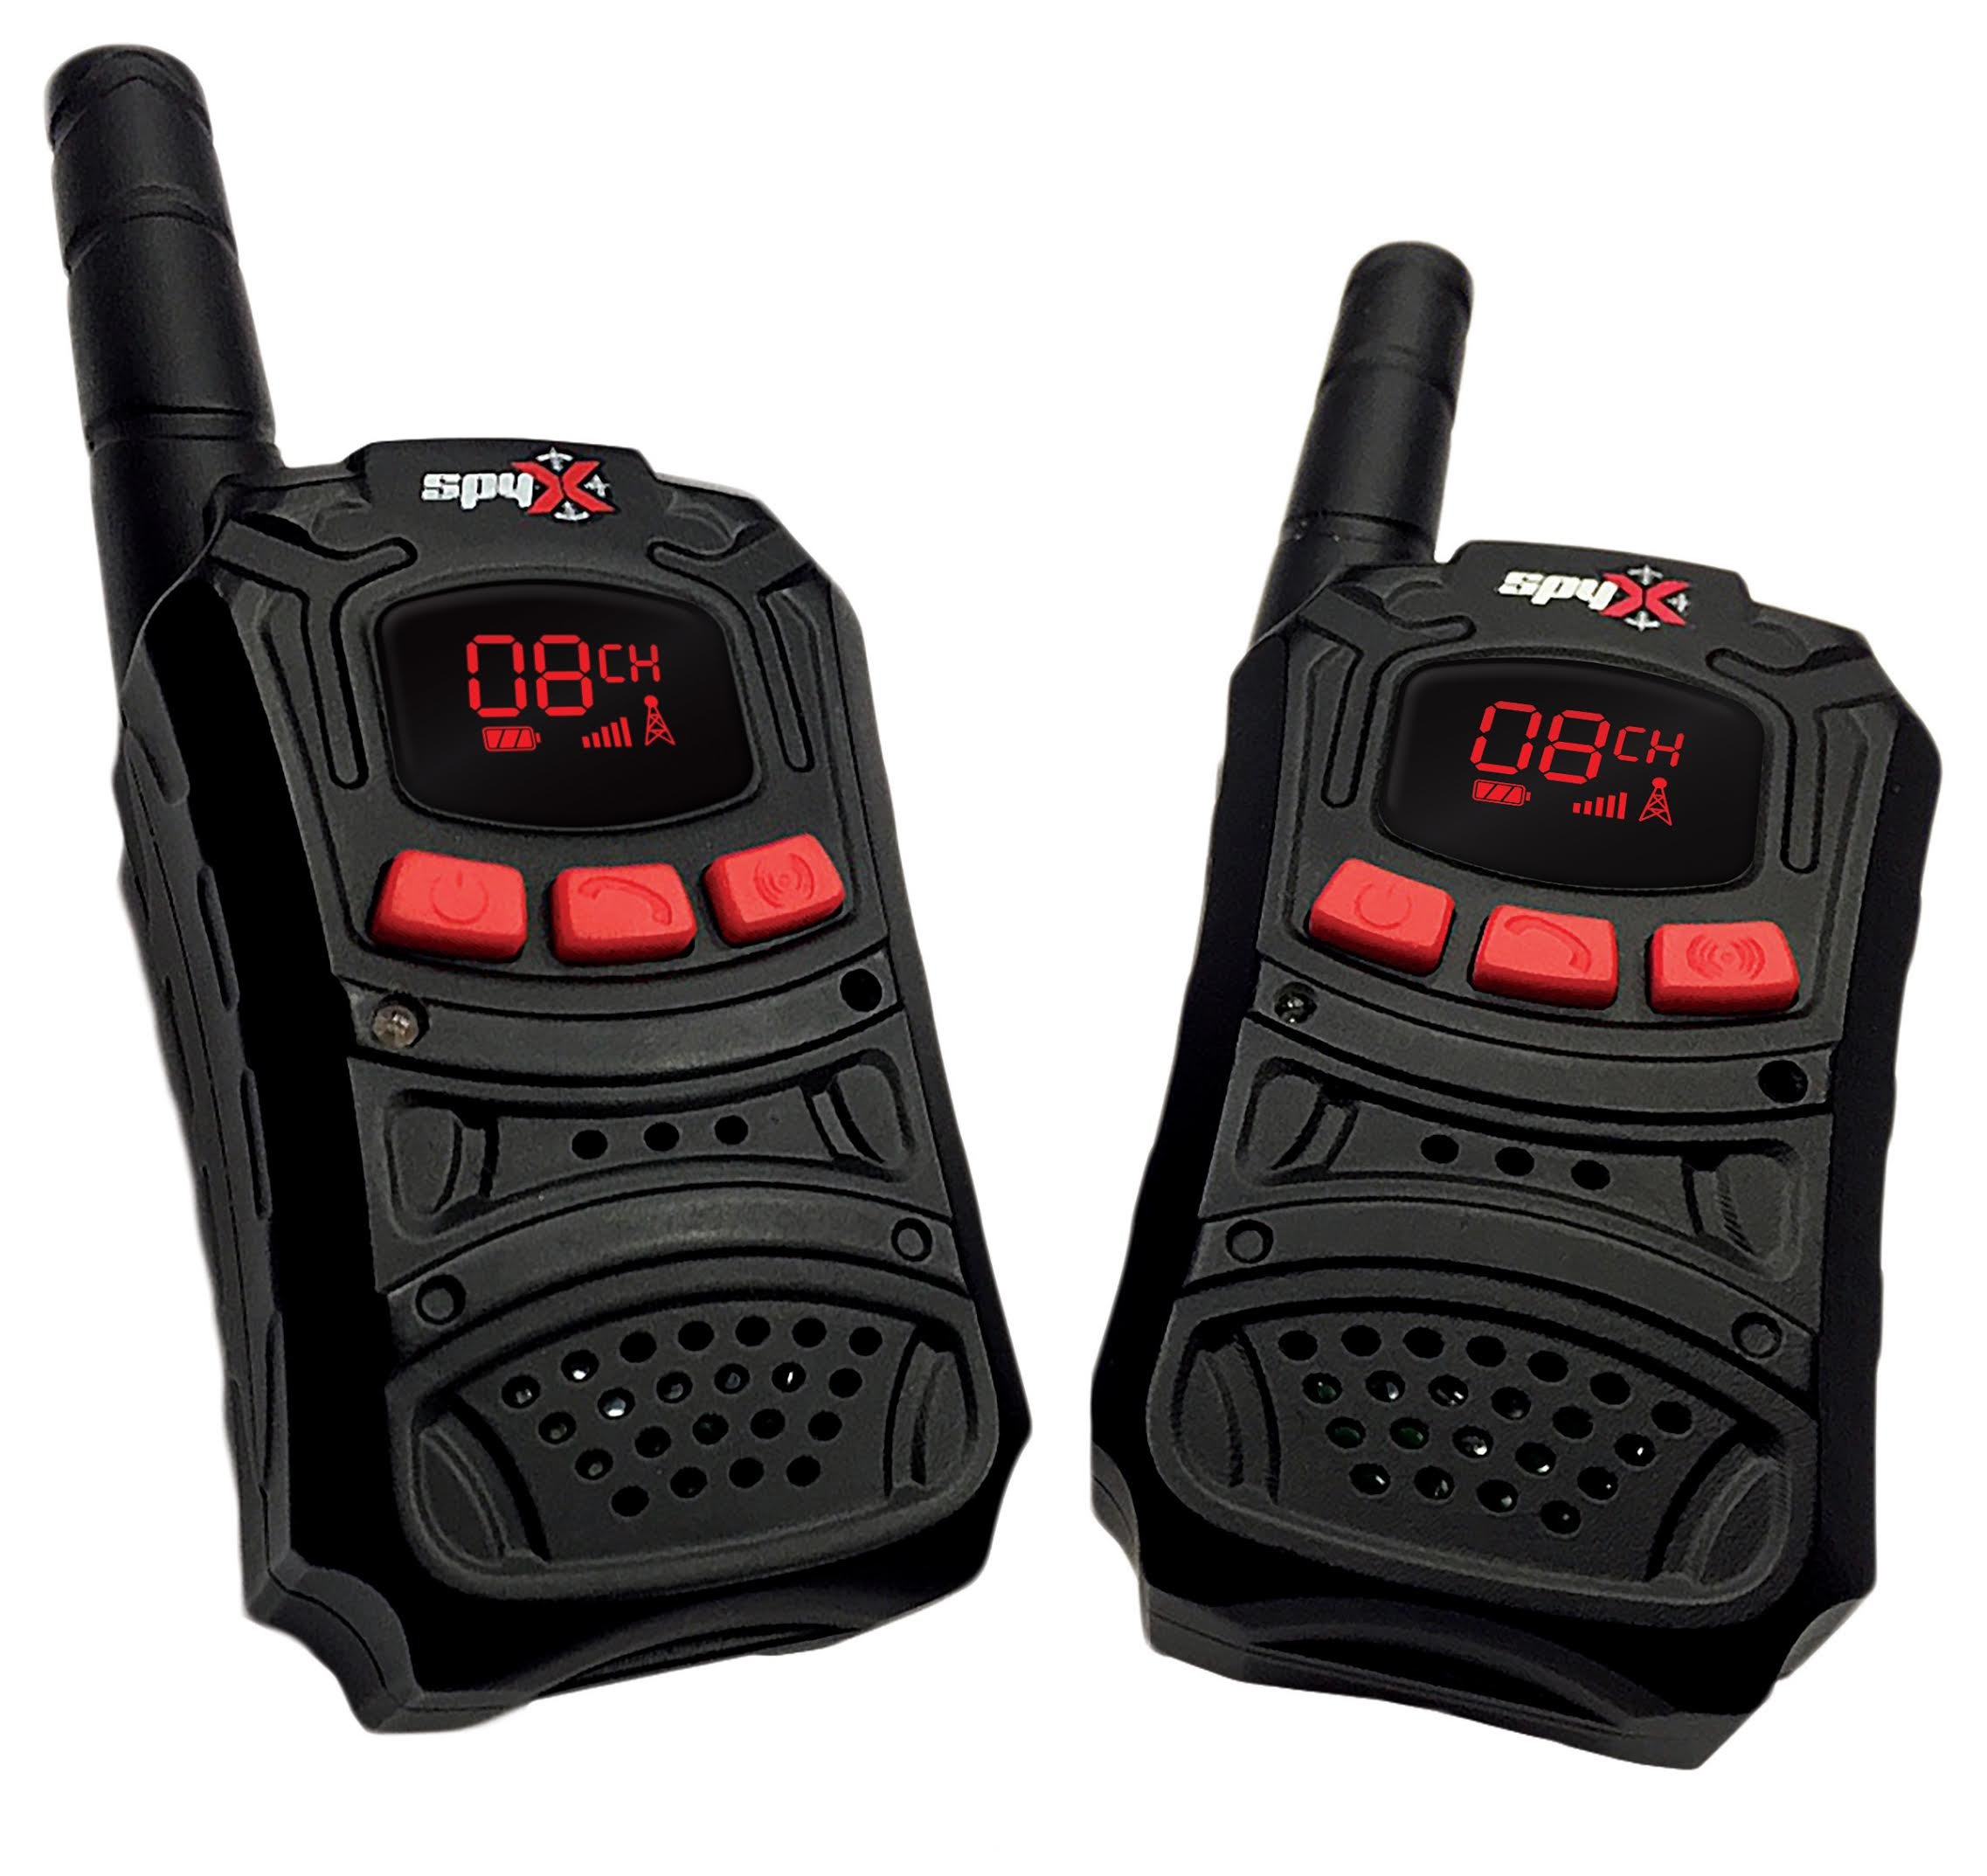 SpyX Walkie Talkies + Recon Watch - Double Agent Tool Set! 2 Pack of Walkie Talkies + an 8-in-1 Watch. Essential Items for Any Spy Gear Collection to Get The Job Done While Spying On The Enemy